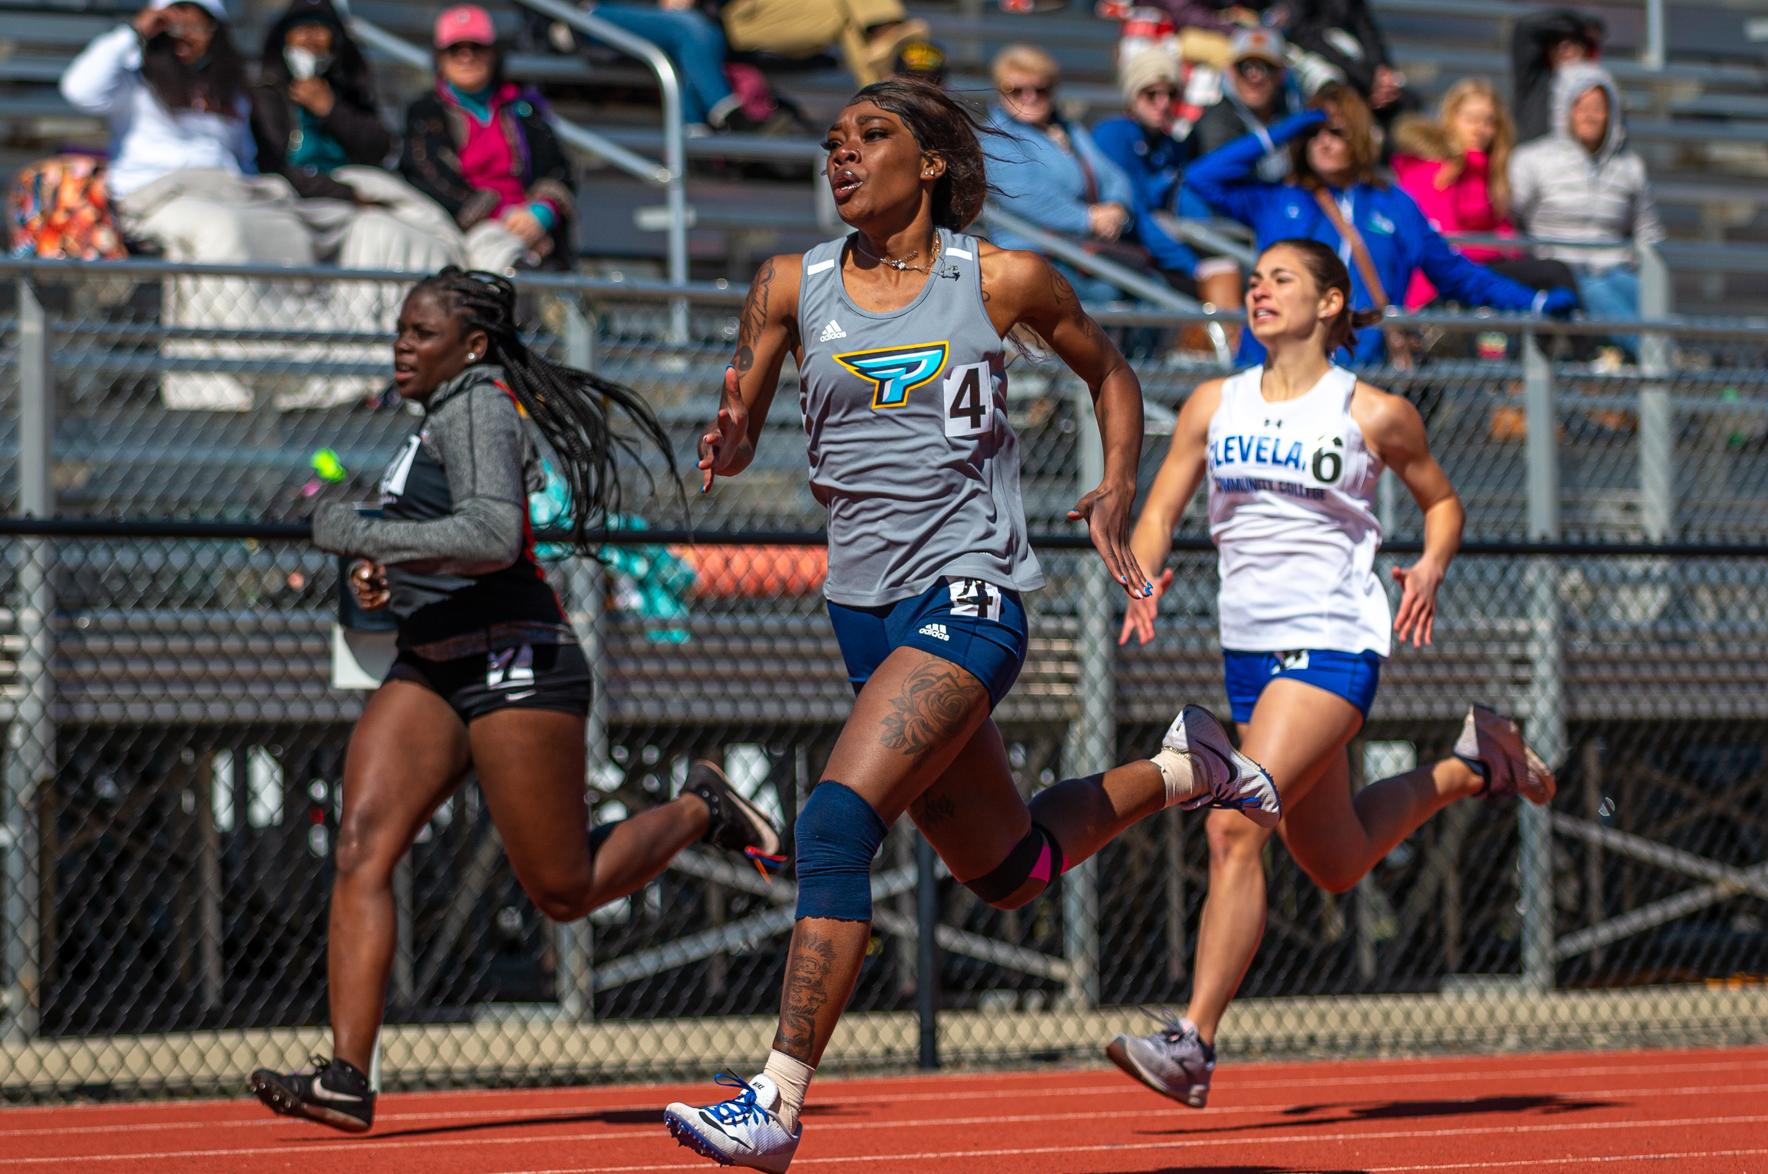 Several personal records fall for distance track at Annual Alice Coachman Invitational